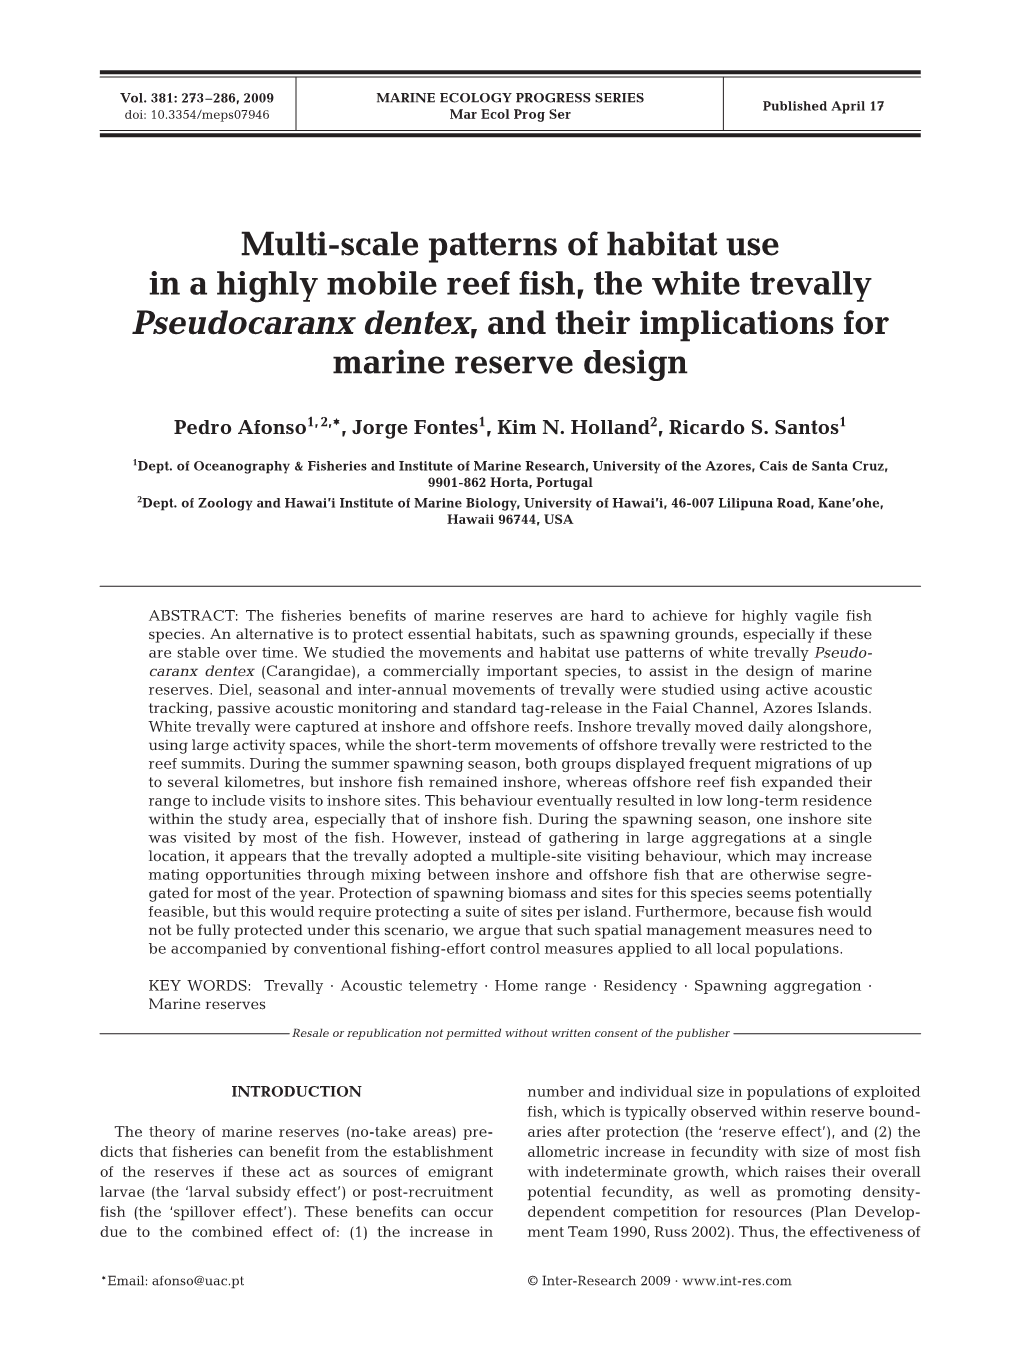 Multi-Scale Patterns of Habitat Use in a Highly Mobile Reef Fish, the White Trevally Pseudocaranx Dentex, and Their Implications for Marine Reserve Design